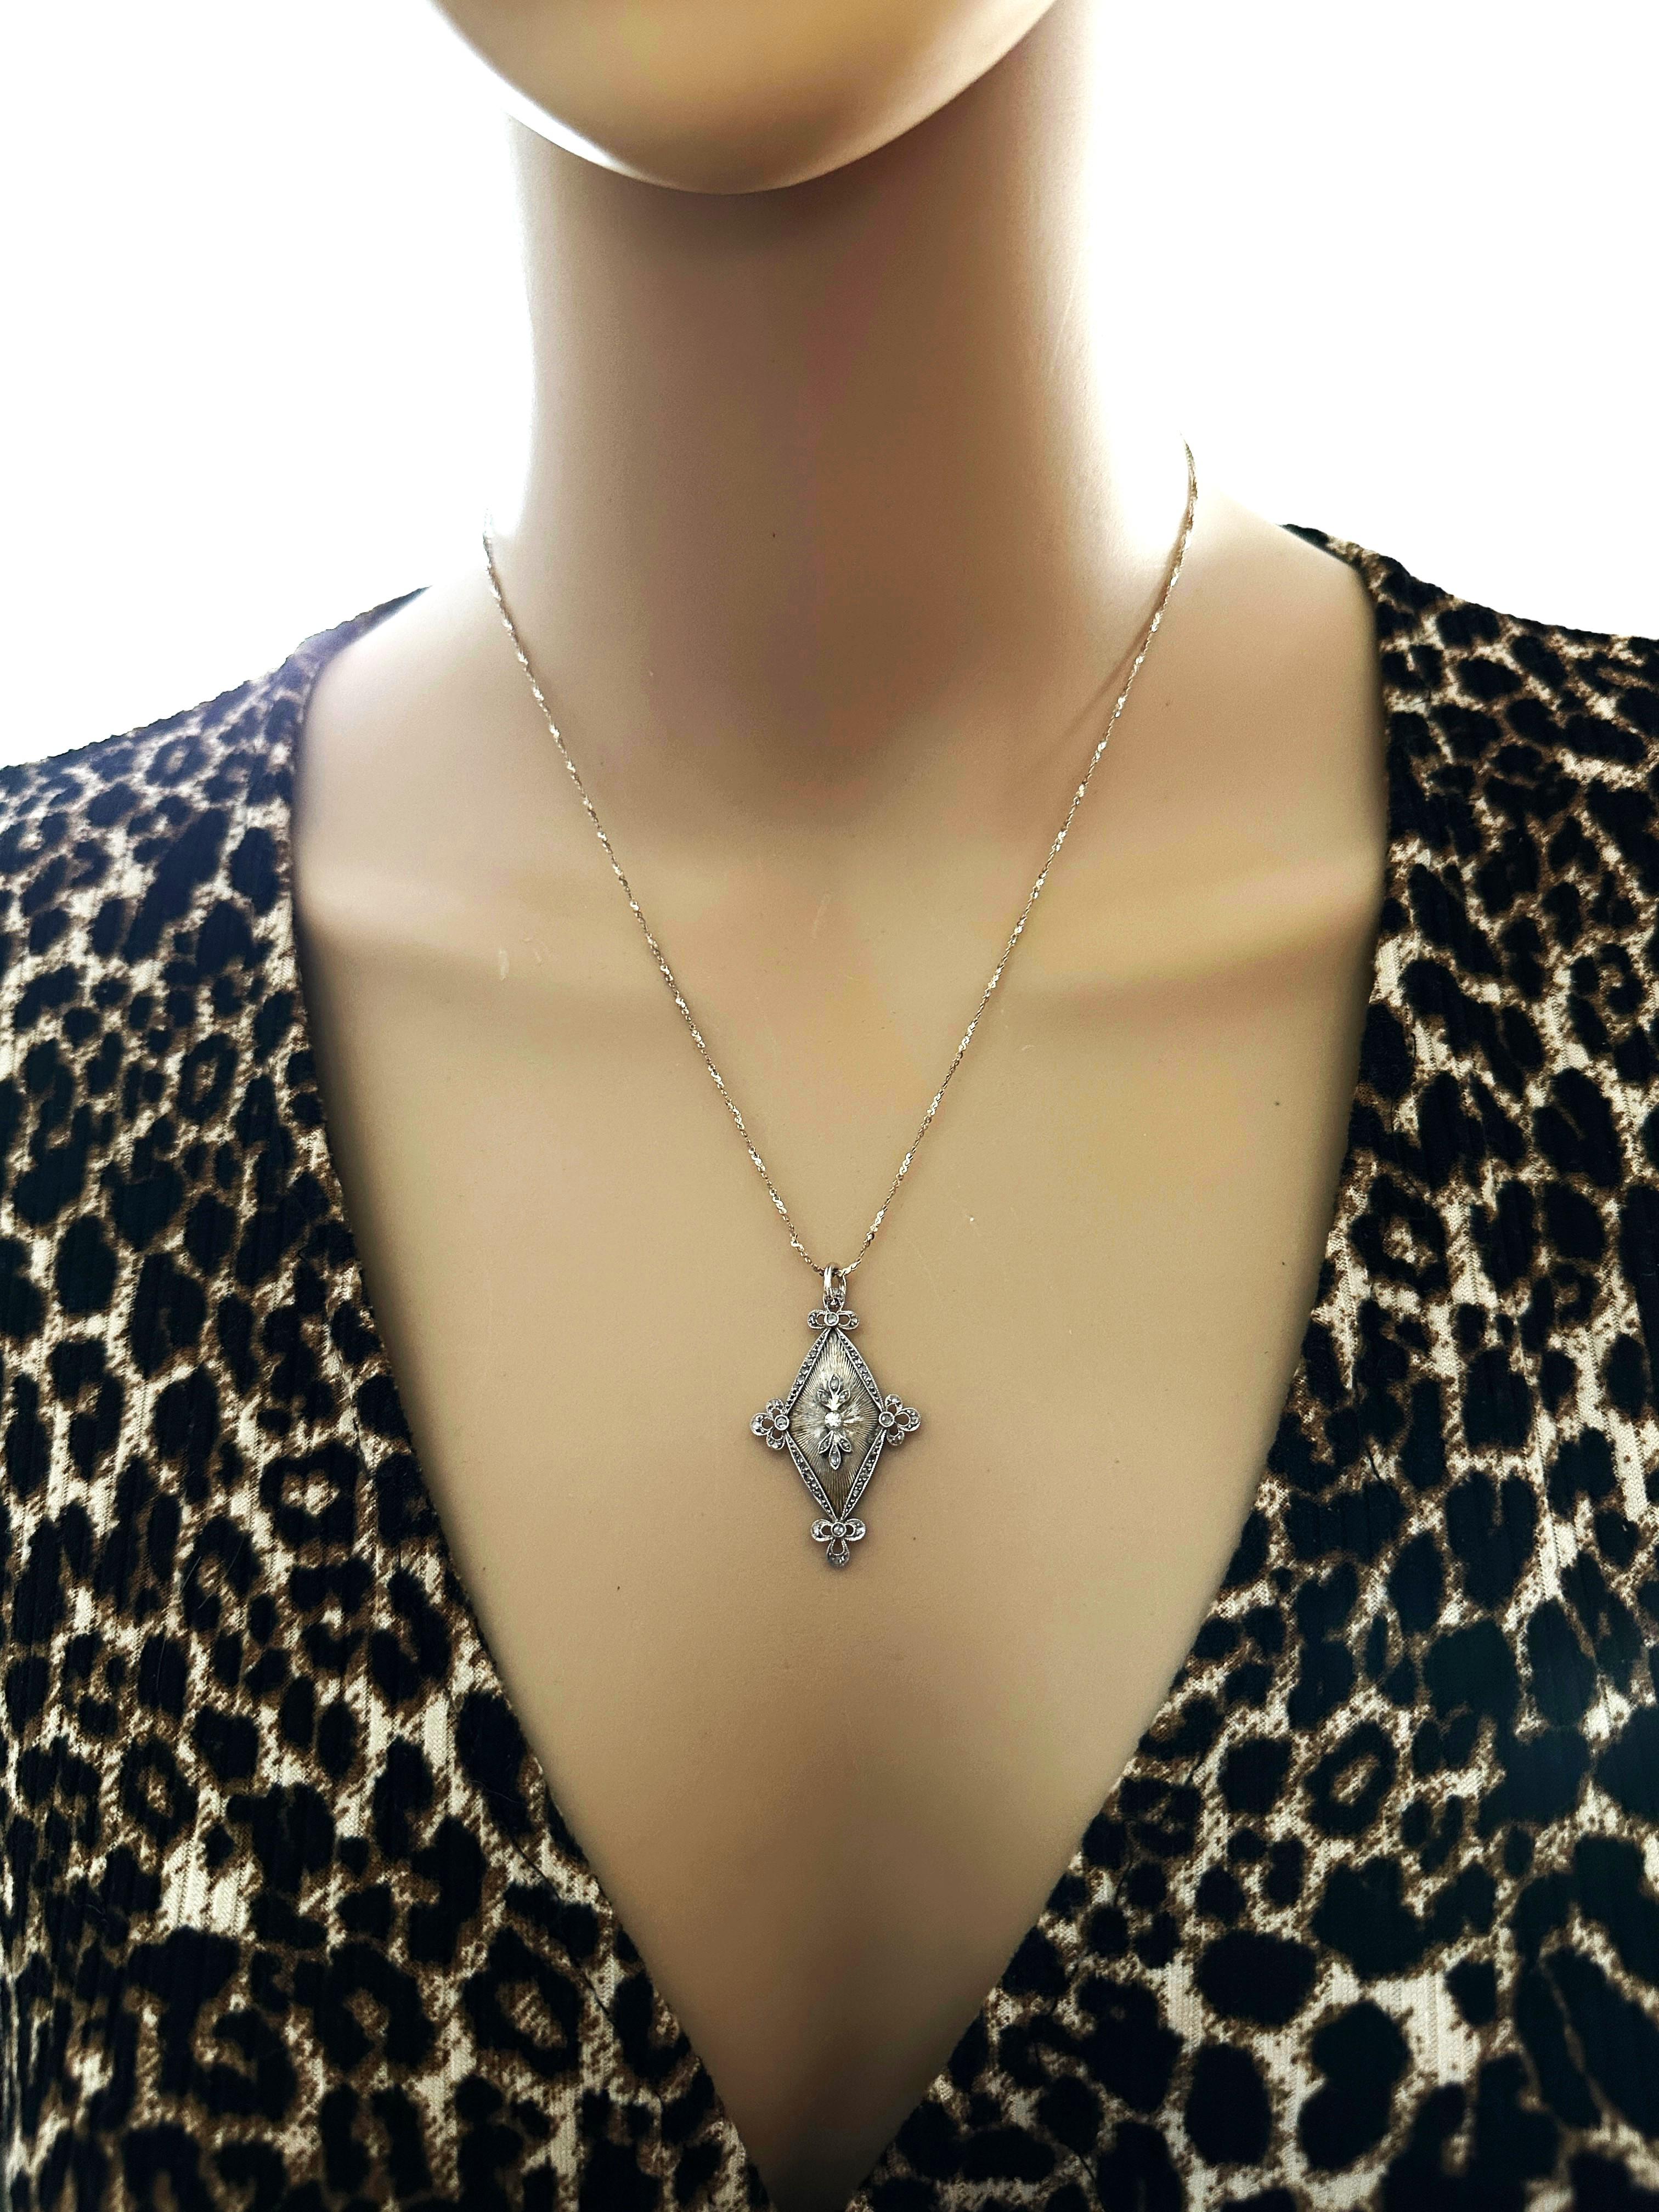 What a gorgeous necklace!!  The border of the pendant is lined brilliant cut stones.  I know that the stones on top, bottom and in the middle test as diamonds.  The top stone is a mine cut diamond and the stones on the 4 corners are rose cut